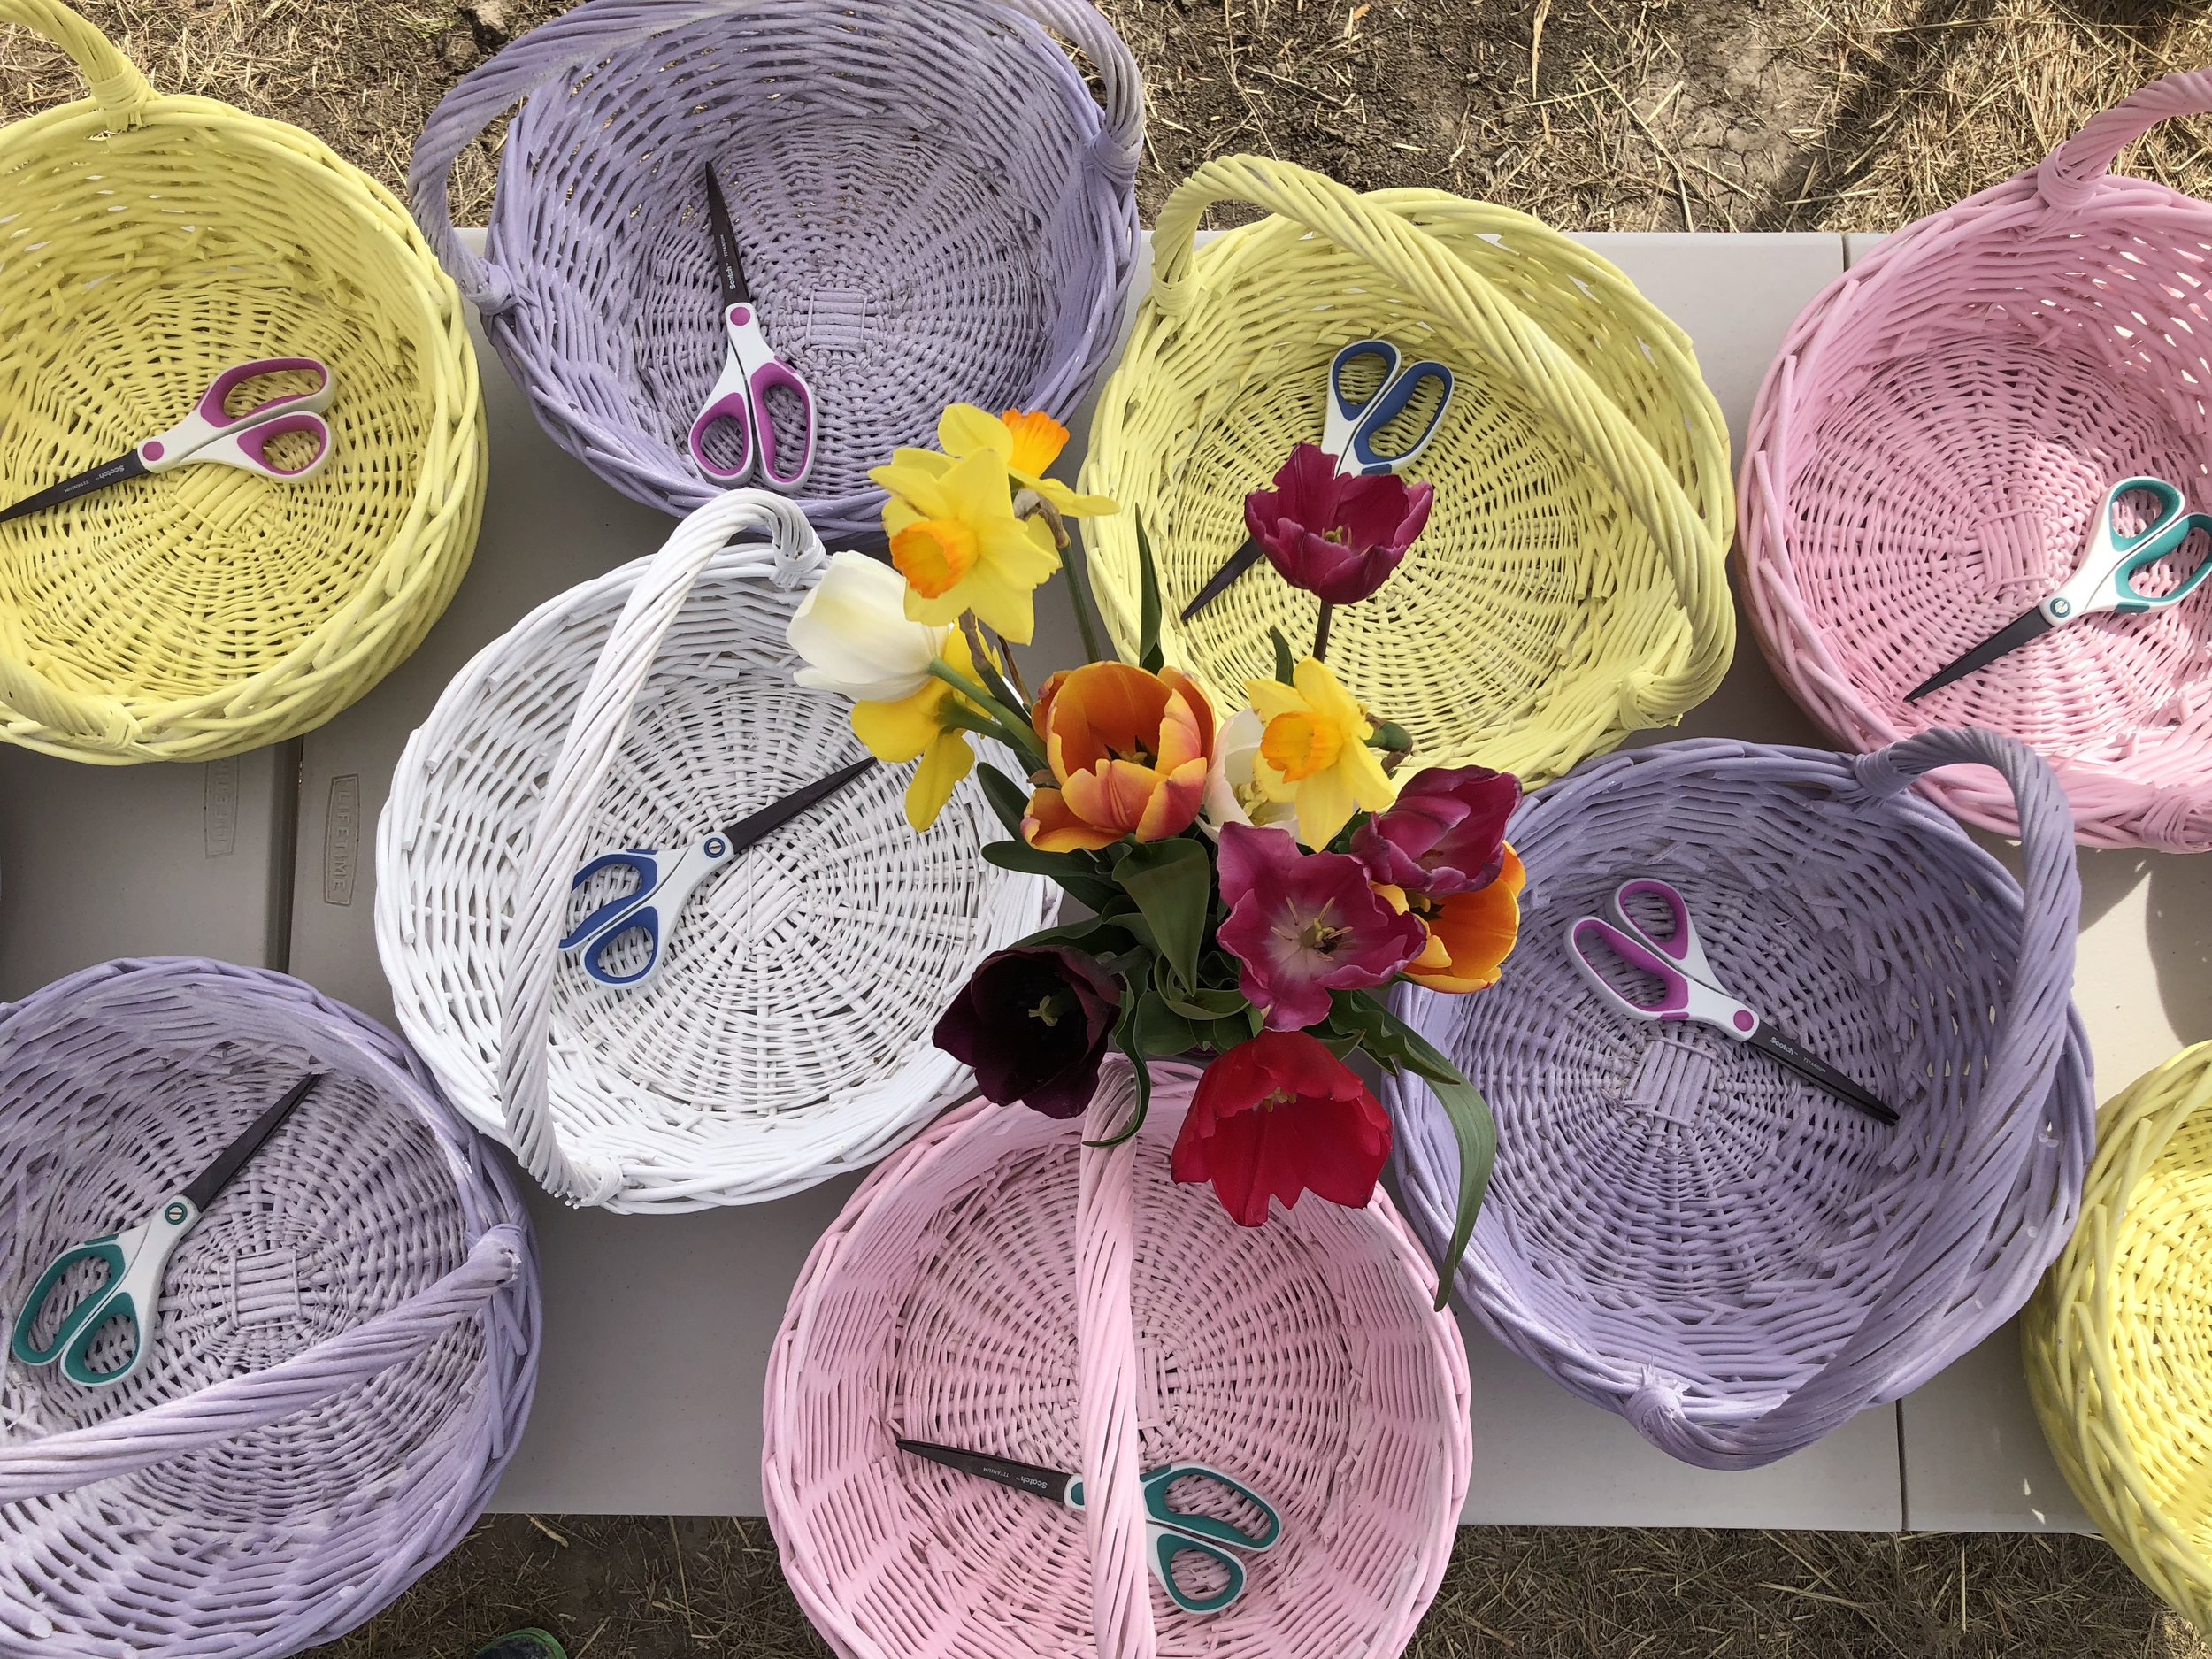 Flowers and Baskets.JPG